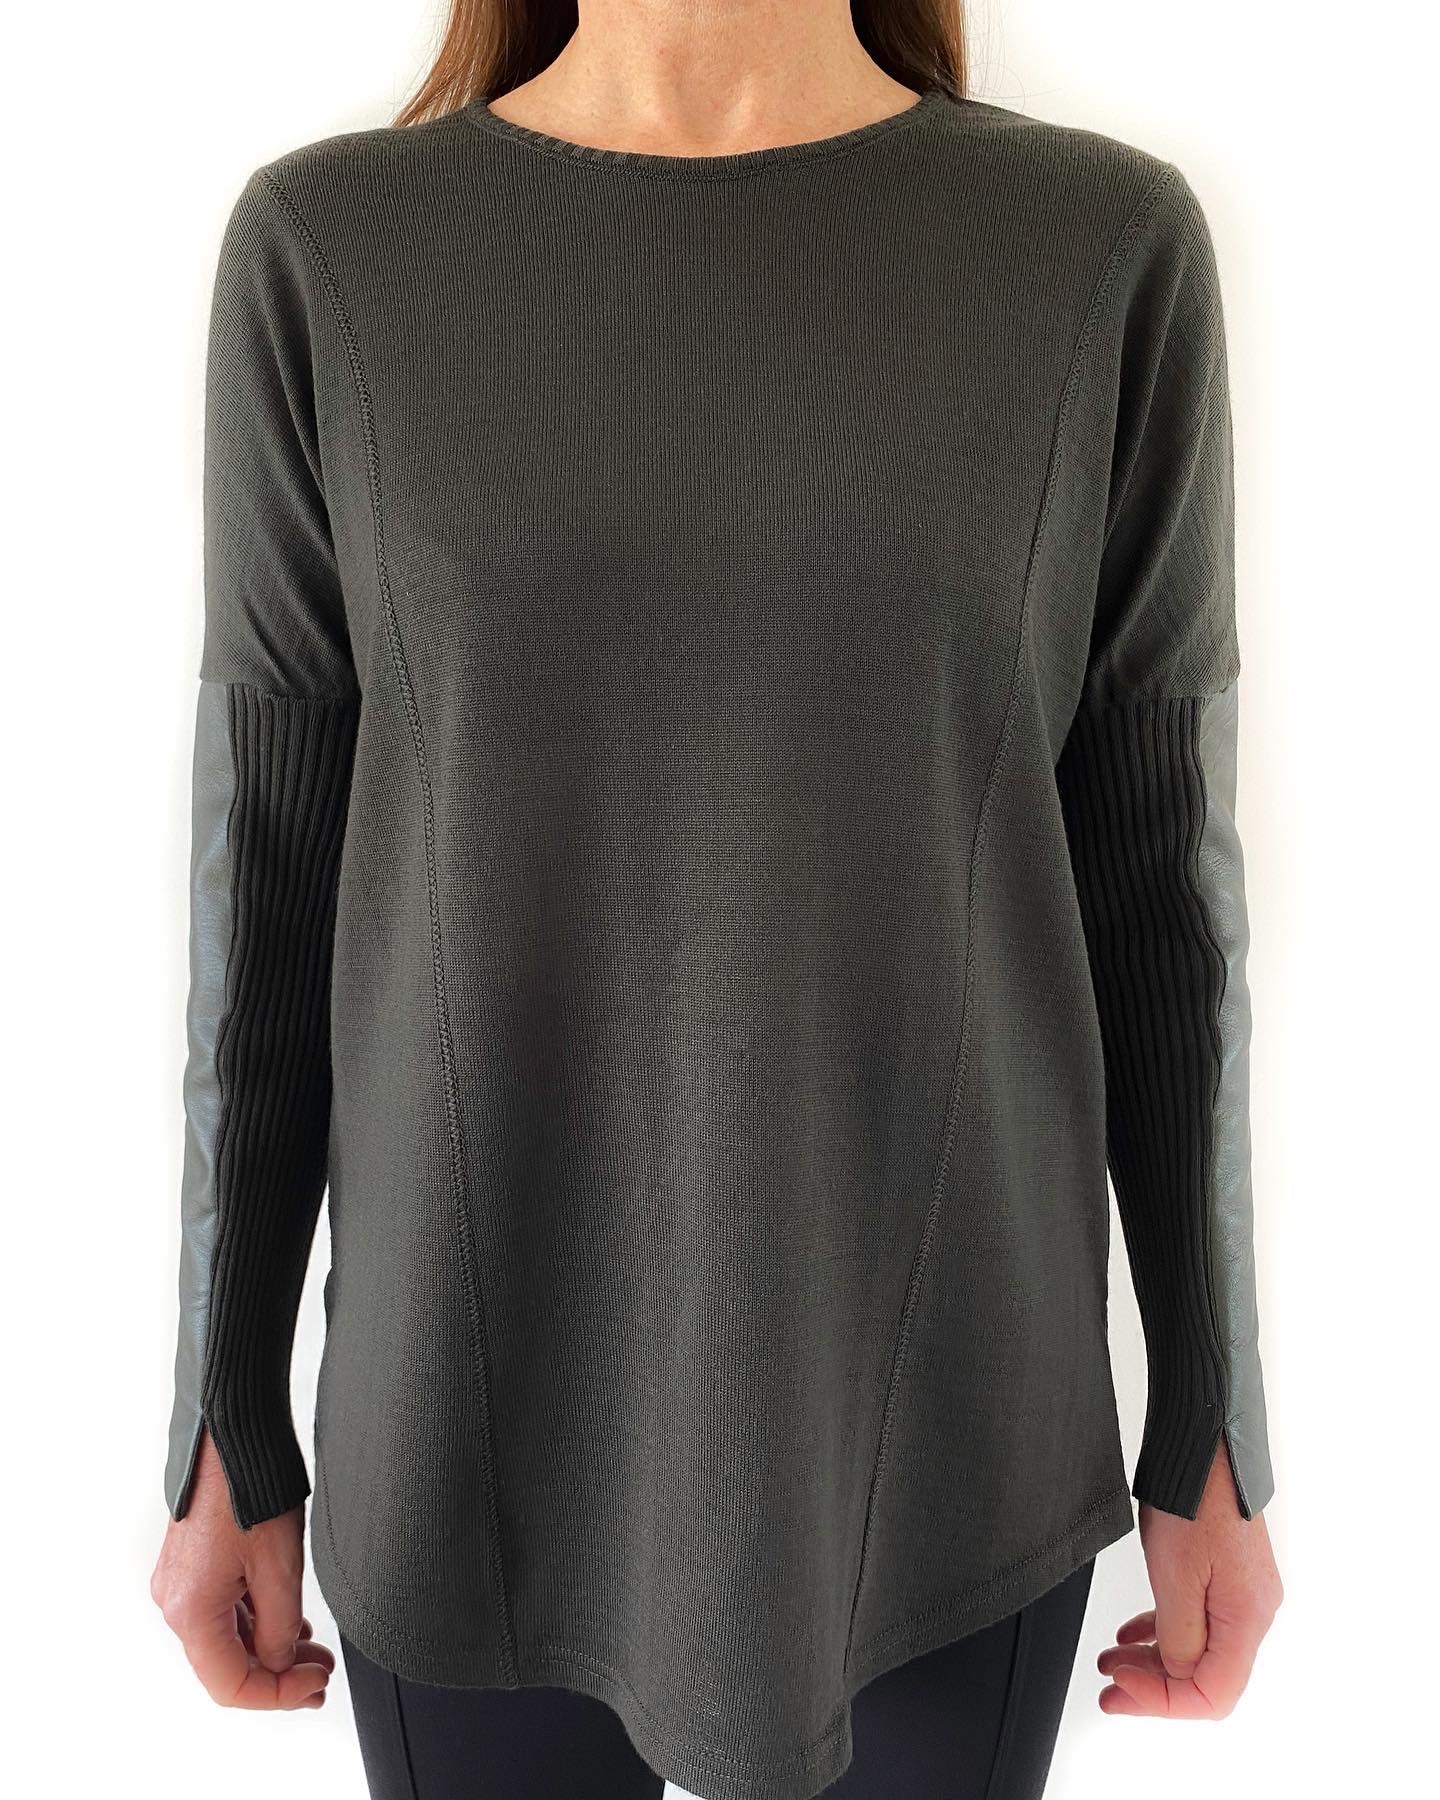 Knit Jumper with Leather Insert Sleeves NEW COLOURWAYS